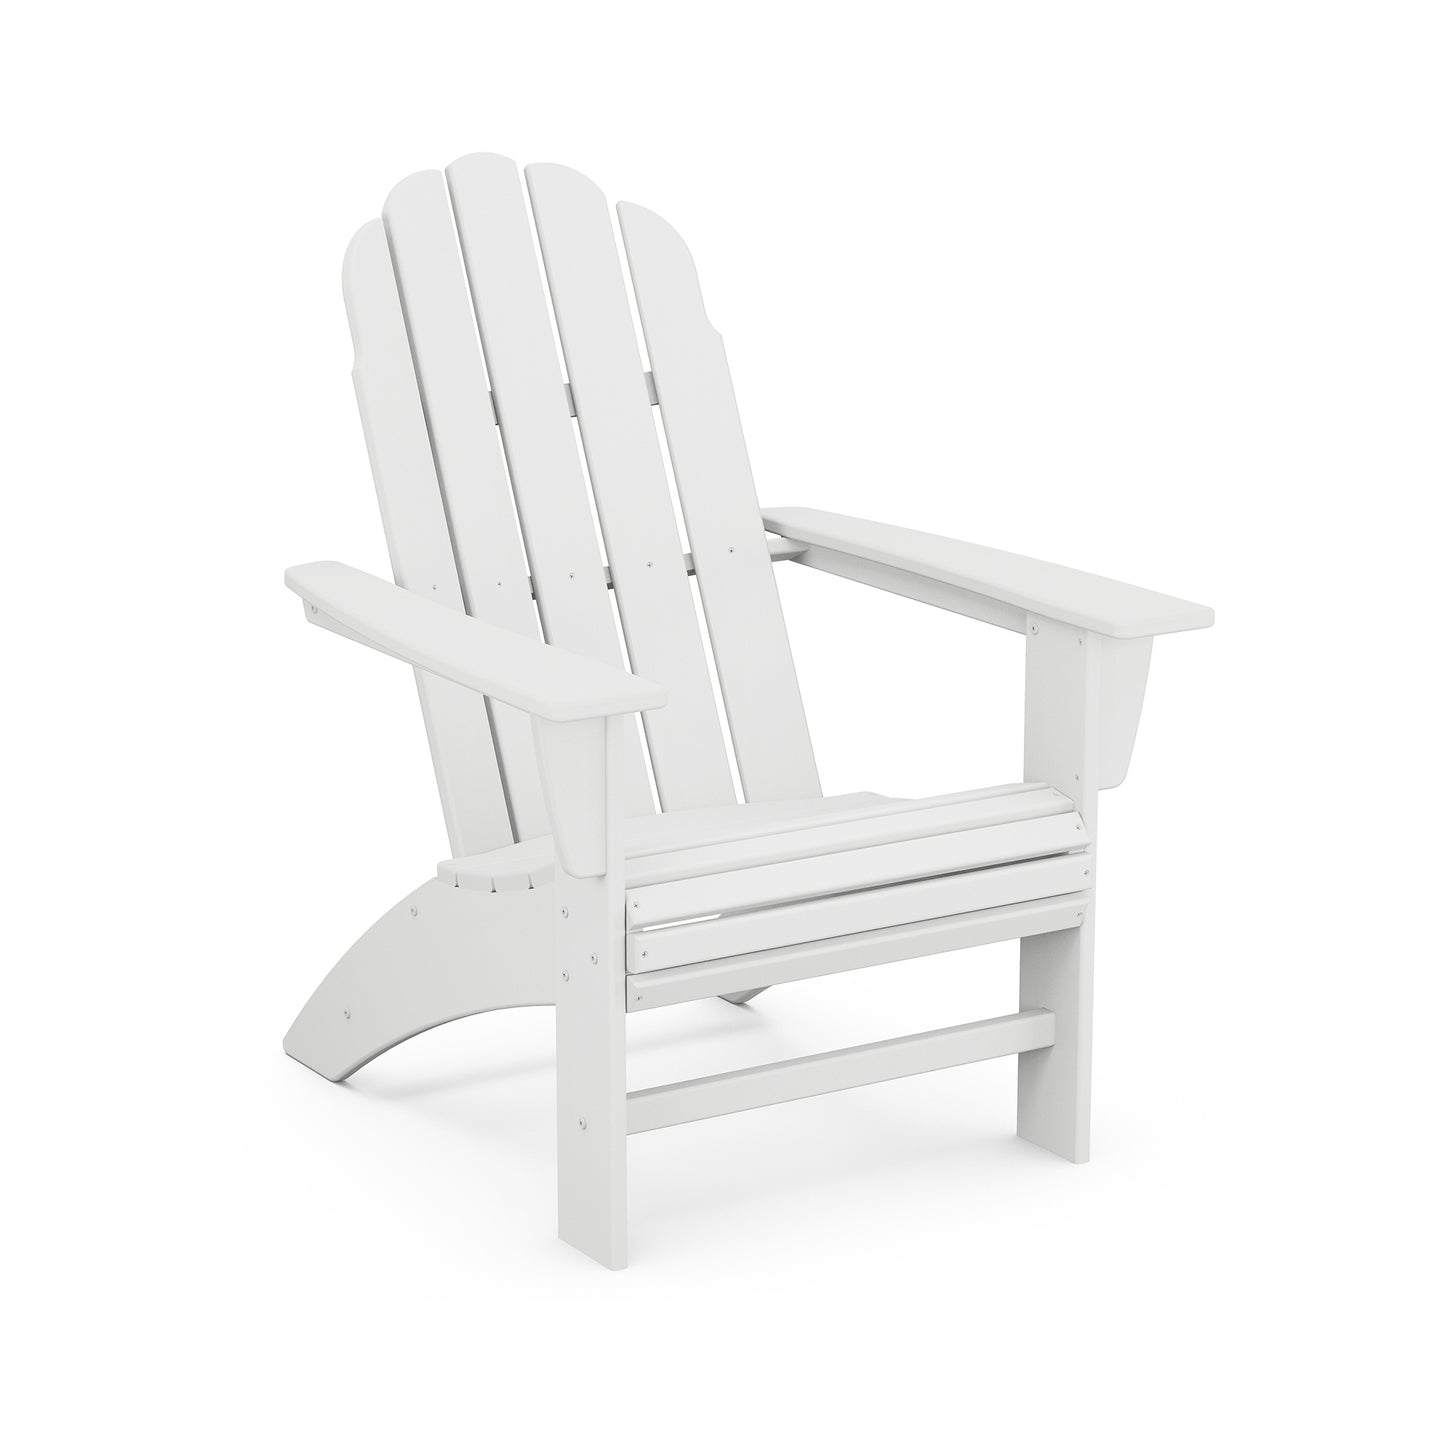 A POLYWOOD® Vineyard Curveback Adirondack chair made of durable plastic, set against a seamless white background. The chair features a slatted back and seat, wide armrests, and a gently curved design.